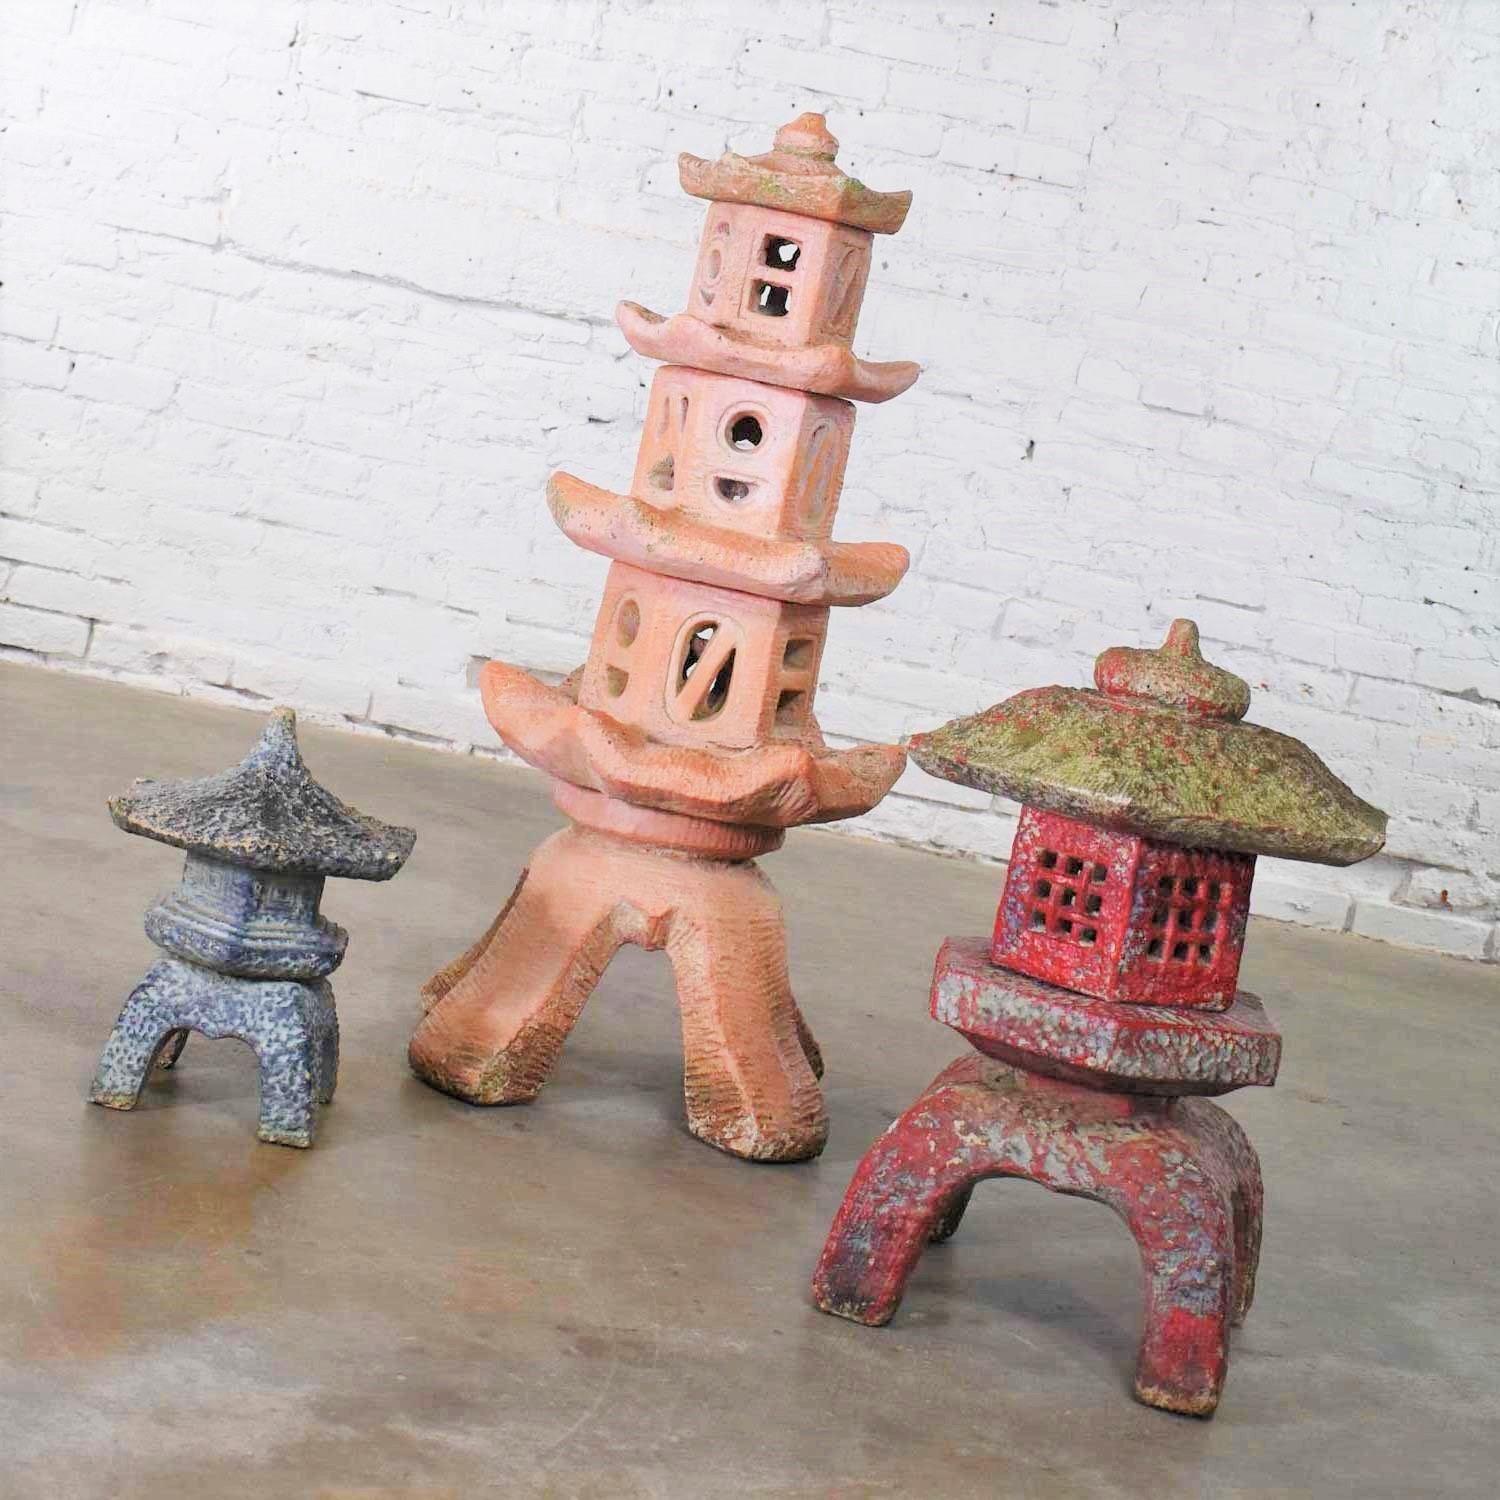 Outstanding trio of vintage concrete Japanese pagoda garden ornaments in three different heights. They are in awesome condition with lots of natural age patina including lichen, chips, and dings. No major flaws just a gorgeous patina. Please see